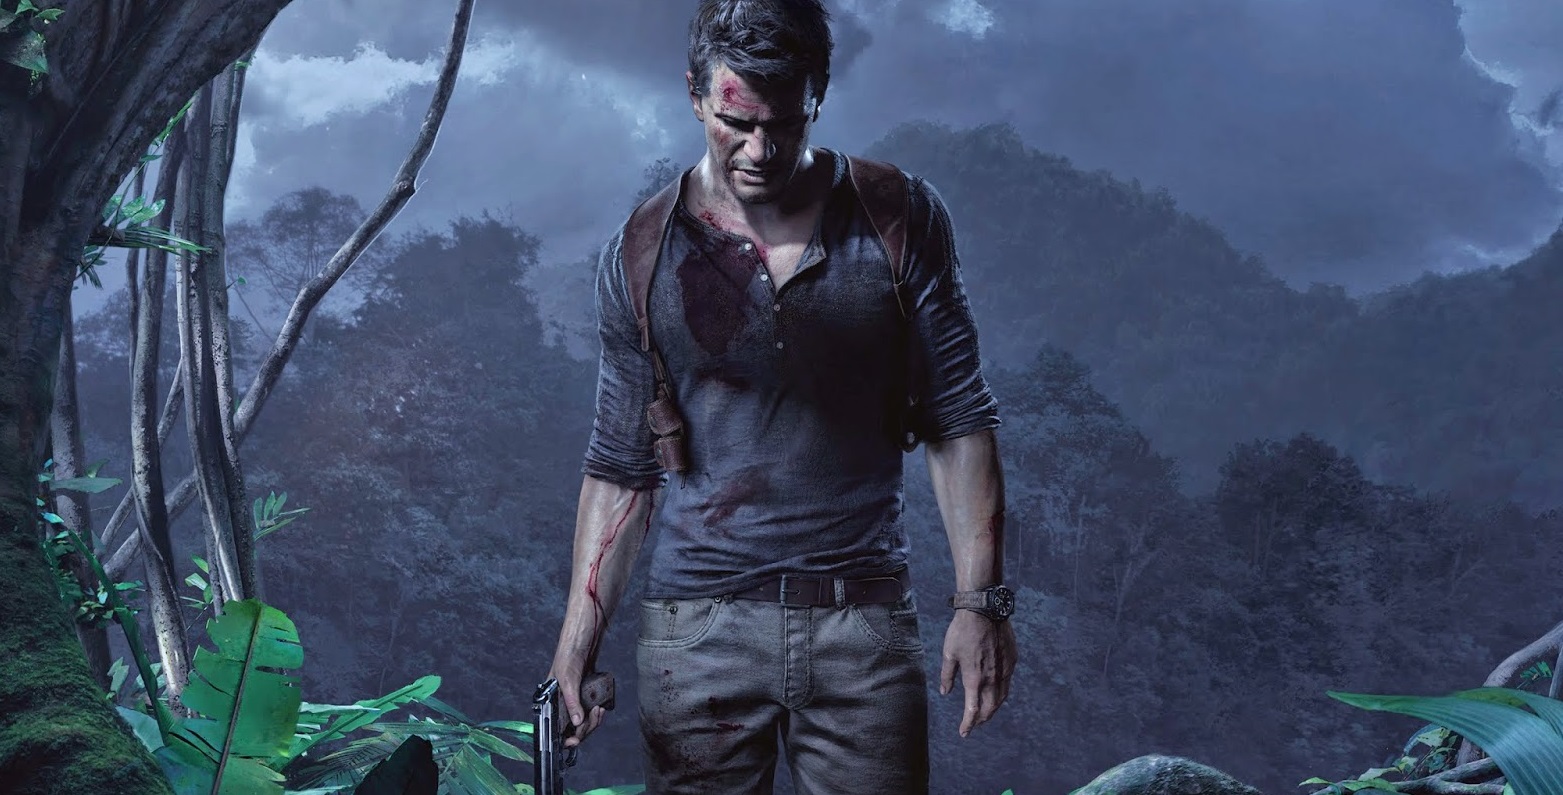 Uncharted 4: A Thief's End Confirmed To Be Nathan Drake's Last Adventure